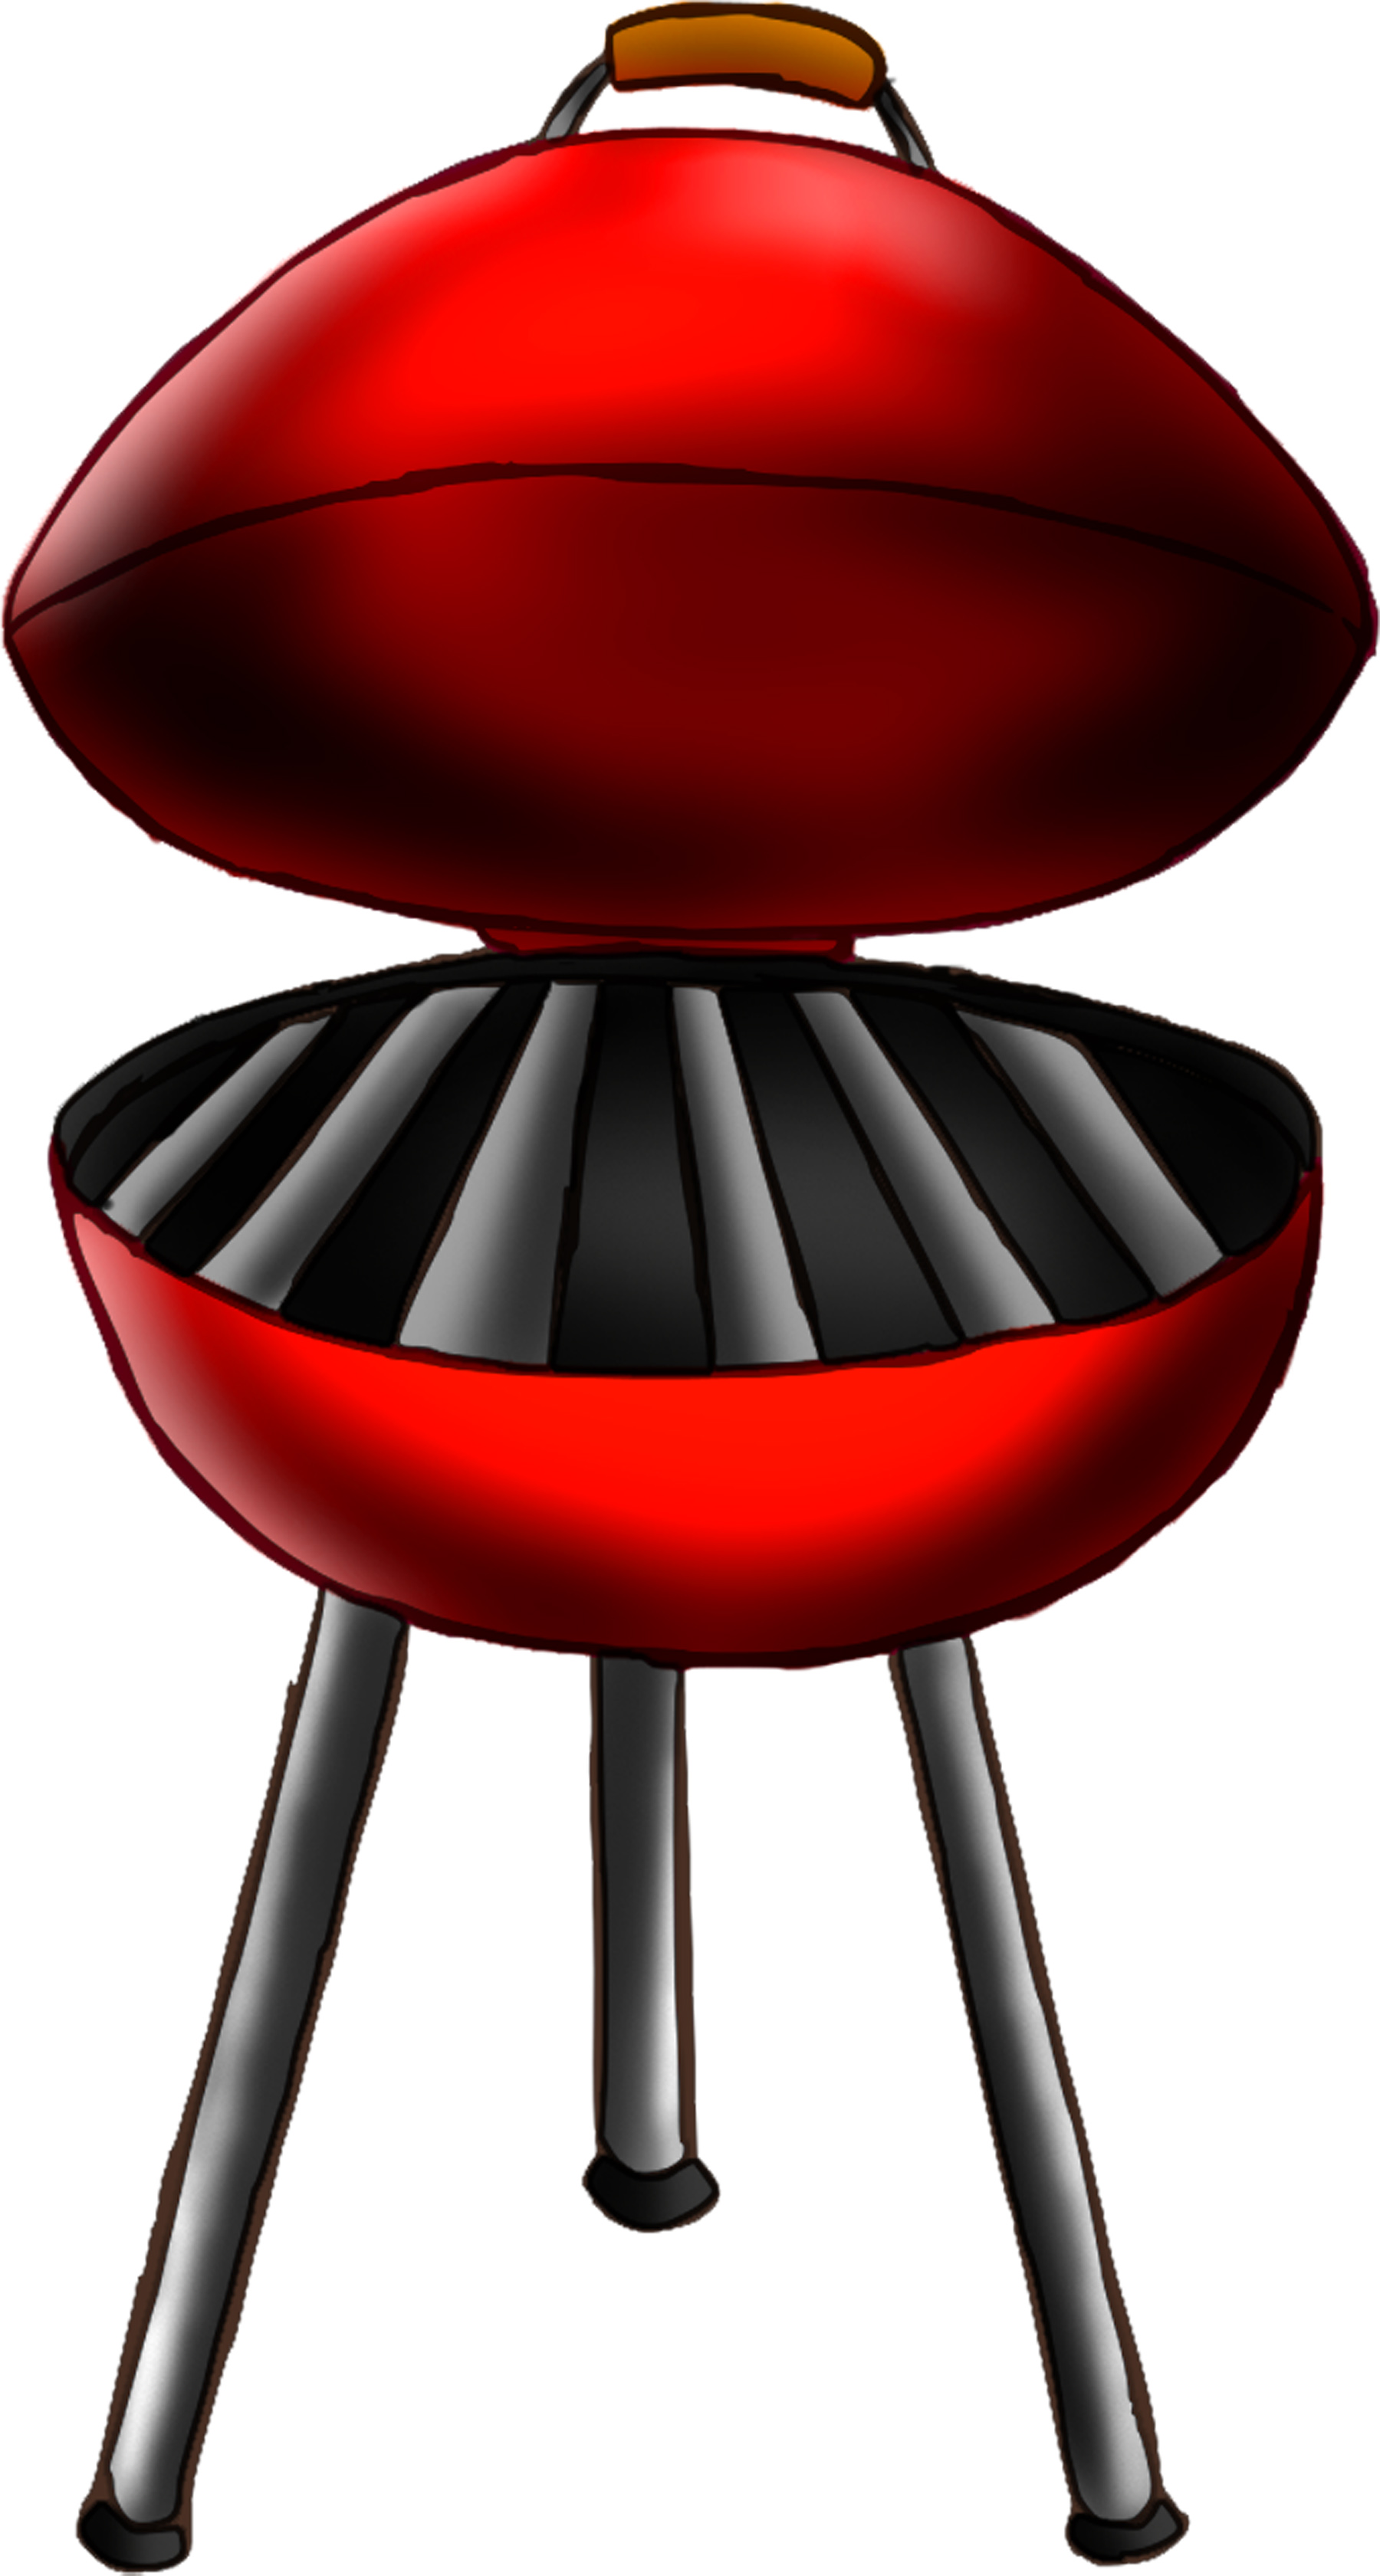 Grill clipart grill top. Free cliparts download clip